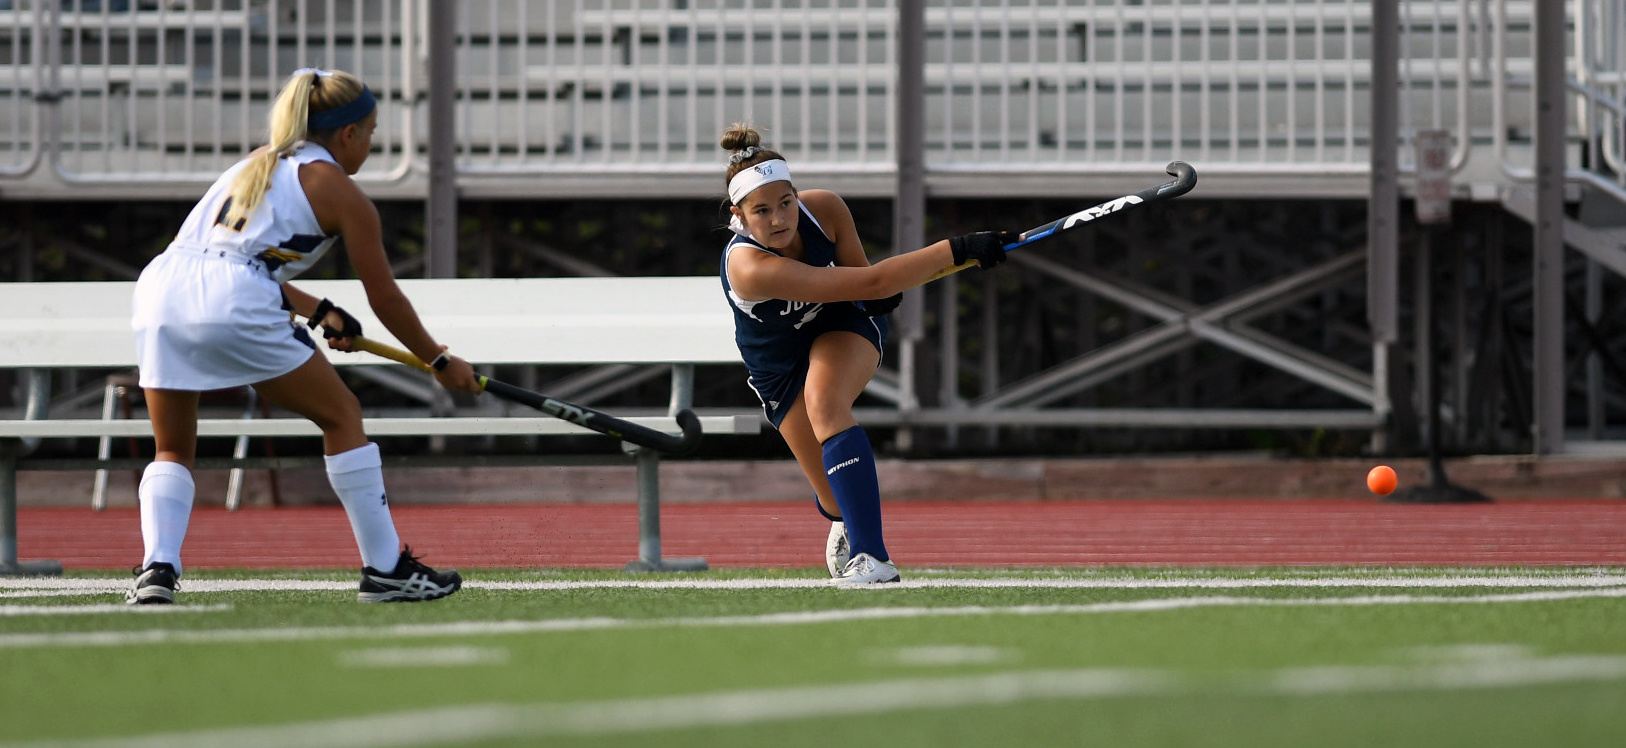 Sarah Bryer tallied her first career goal in the 2-1 win over Washington & Jefferson.